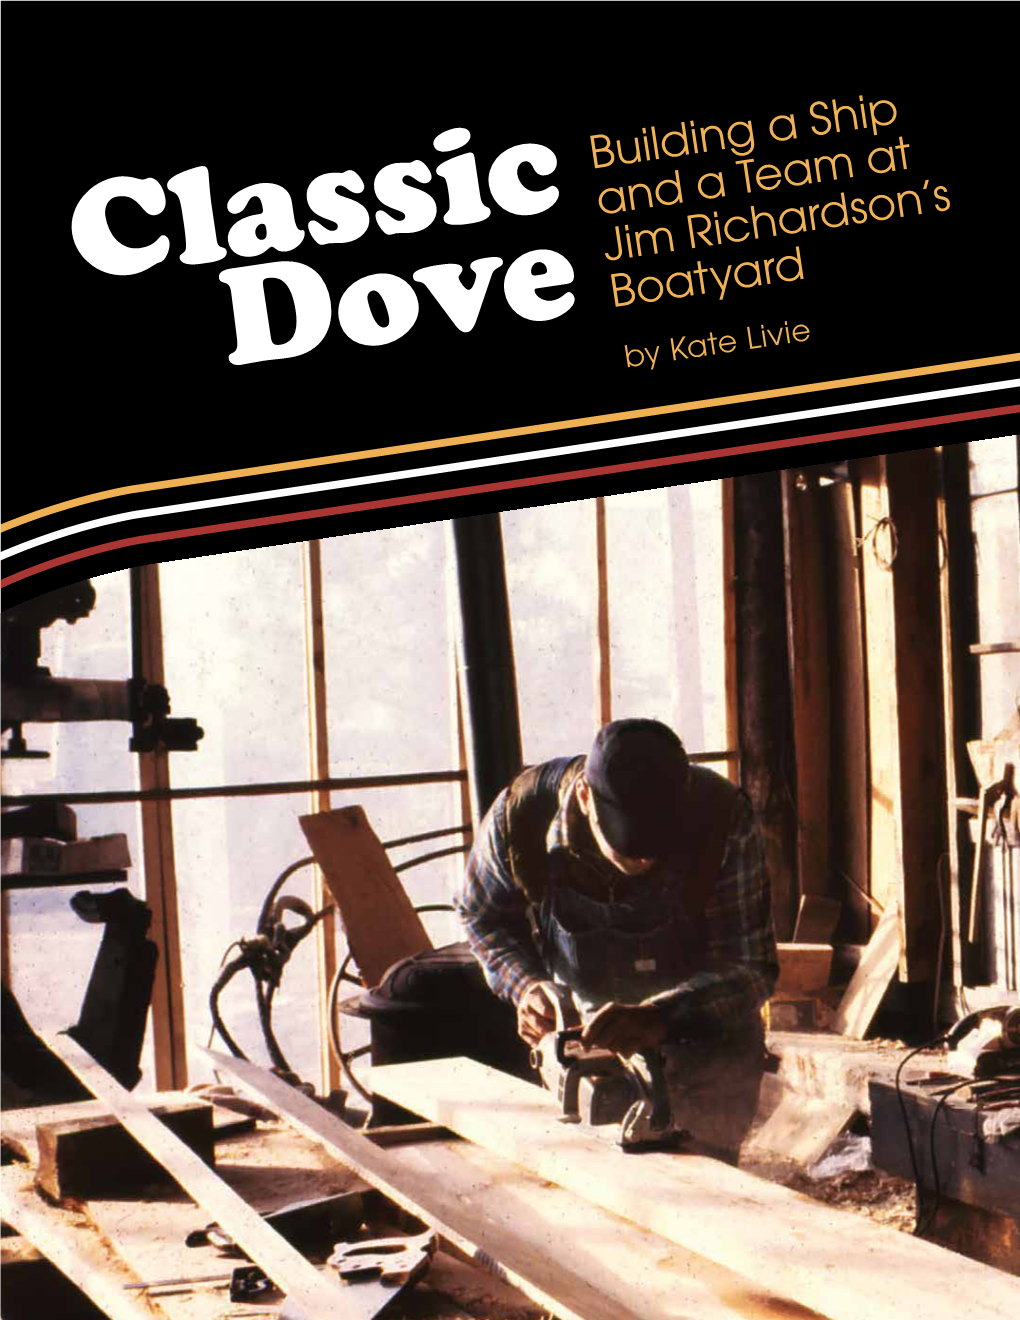 Classic Dove: Building at Ship and a Team at Jim Richardson's Boat Yard